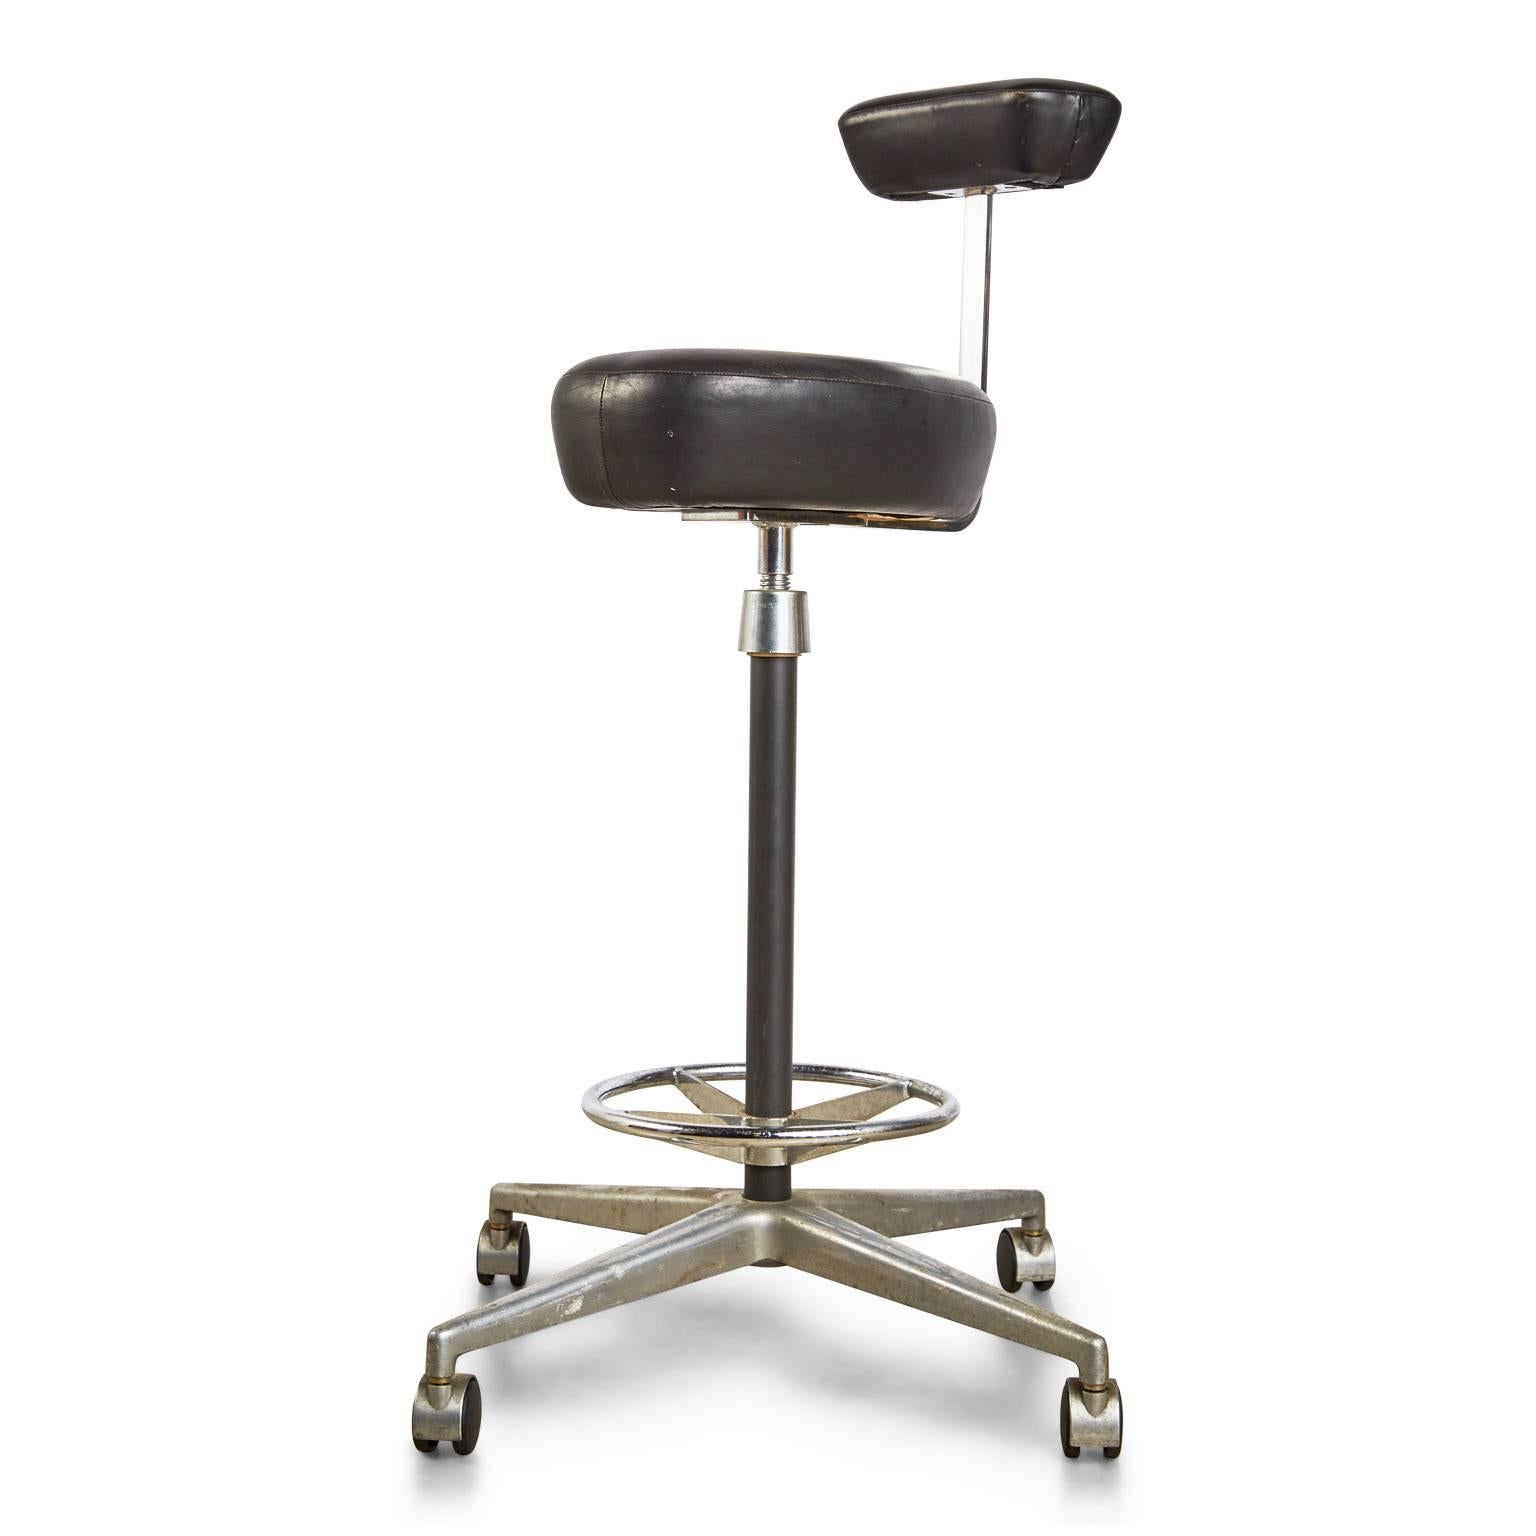 George Nelson for Herman Miller adjustable height drafting stool.
Excellent 1960s drafting stool by George Nelson for Herman Miller. Factory height and adjustable, with original black vinyl upholstery, circular footrest and moveable